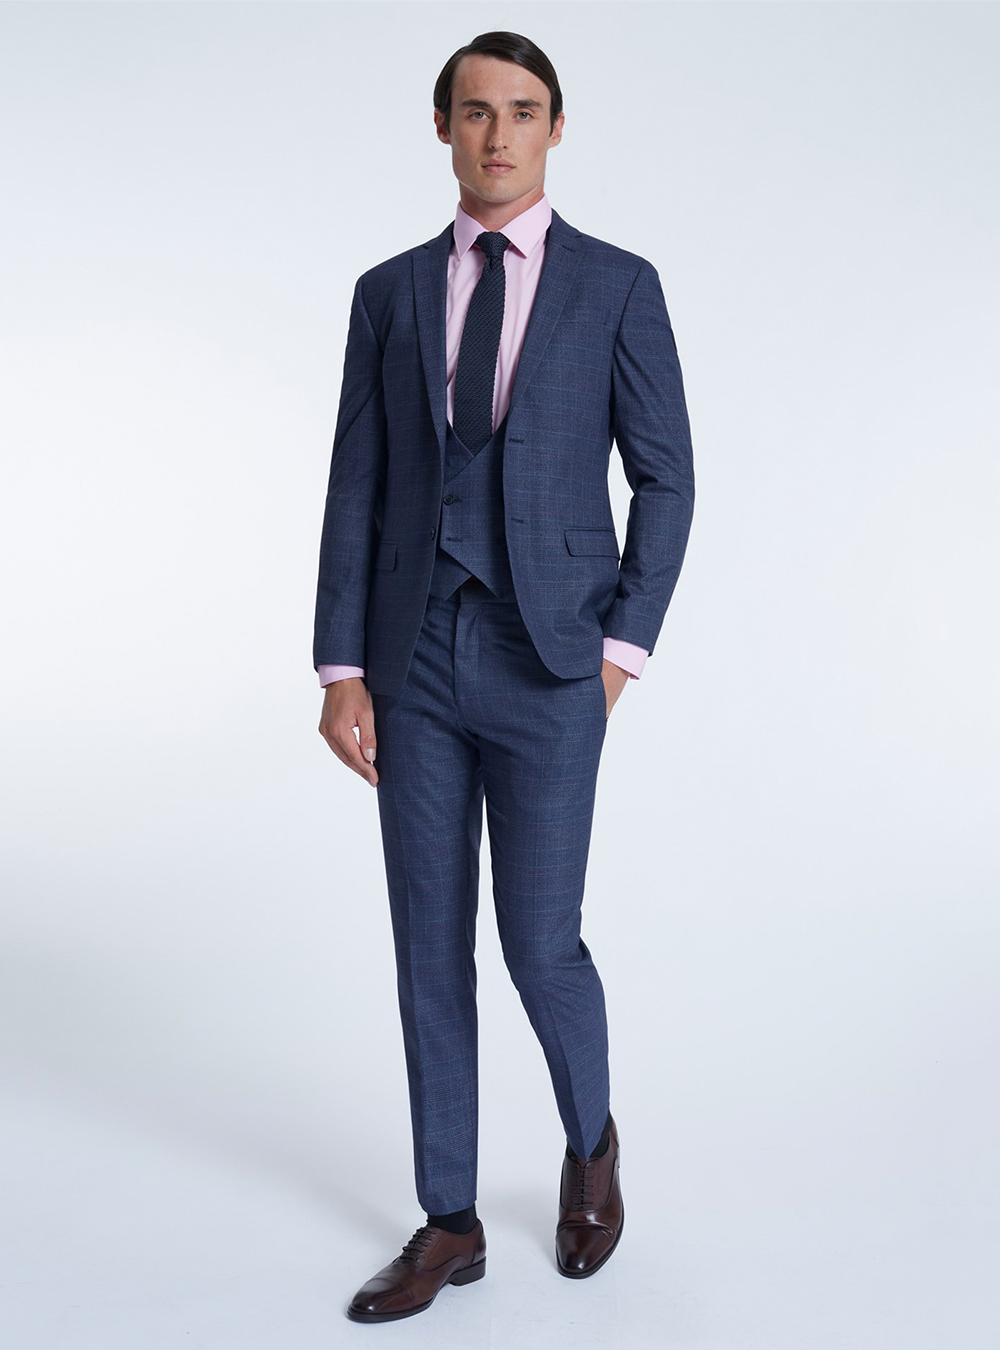 three-piece navy blue suit, pink shirt, and brown oxfords